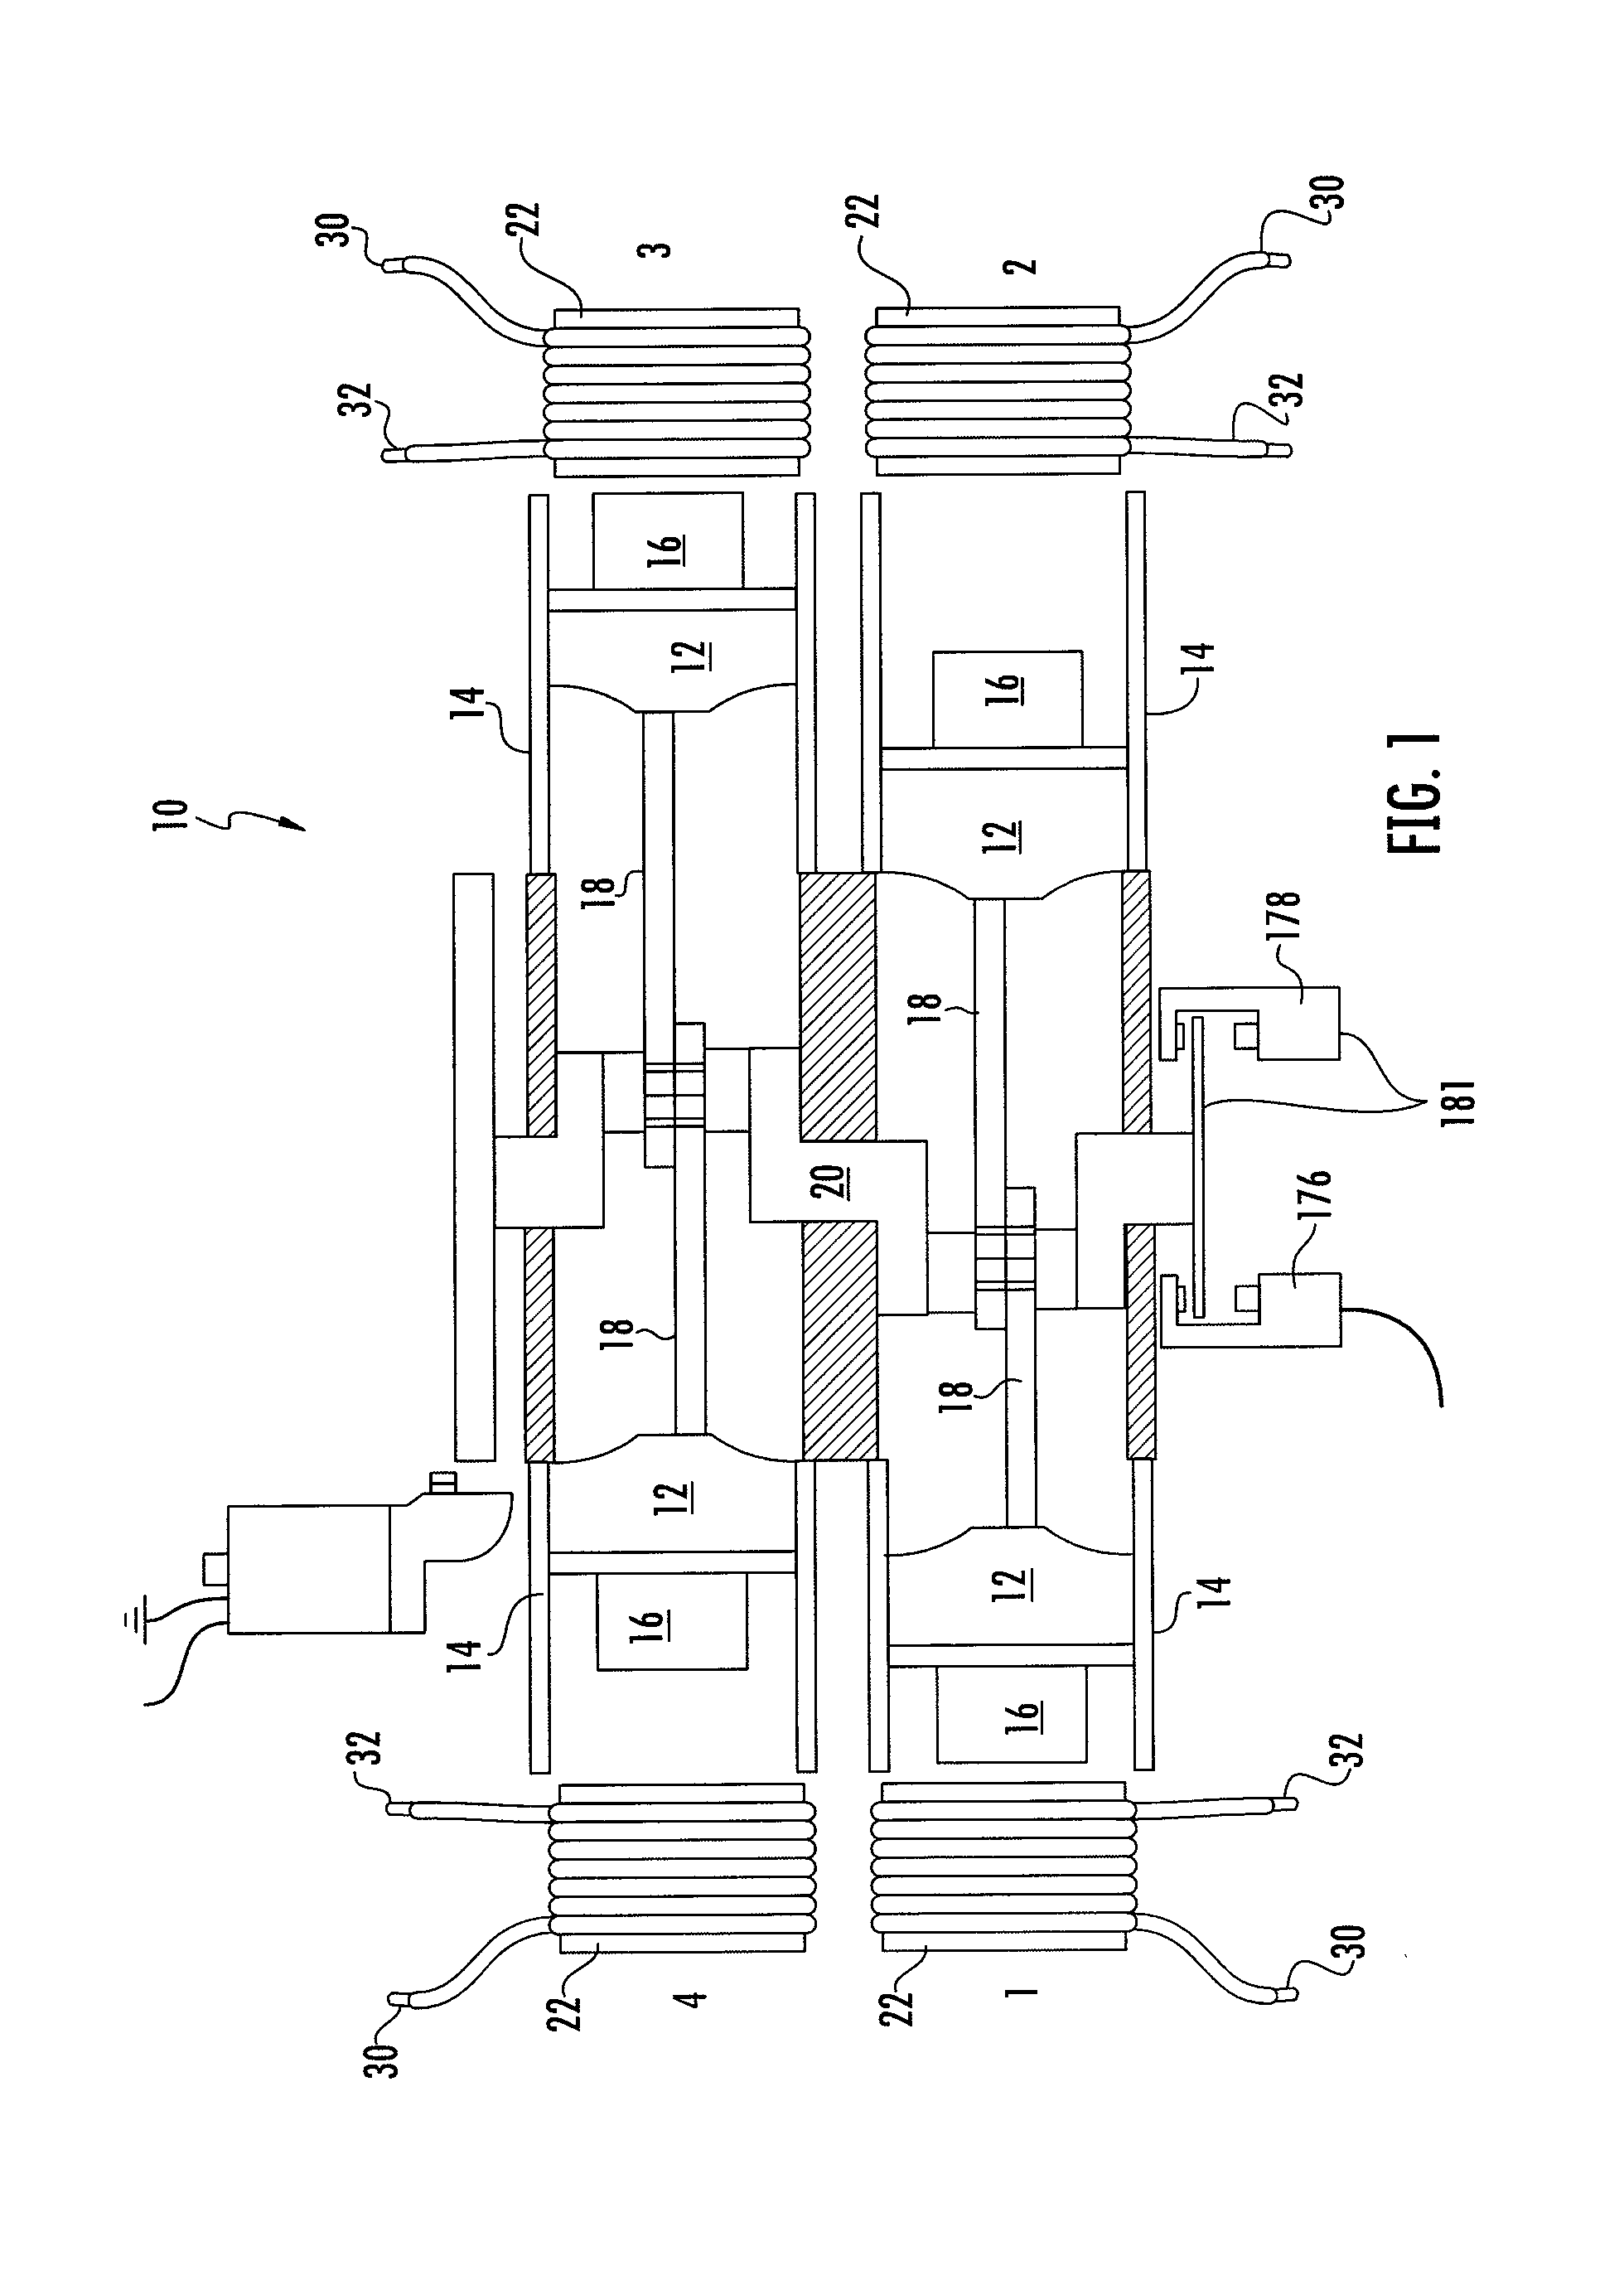 Magnetically Powered Reciprocating Engine And Electromagnet Control System